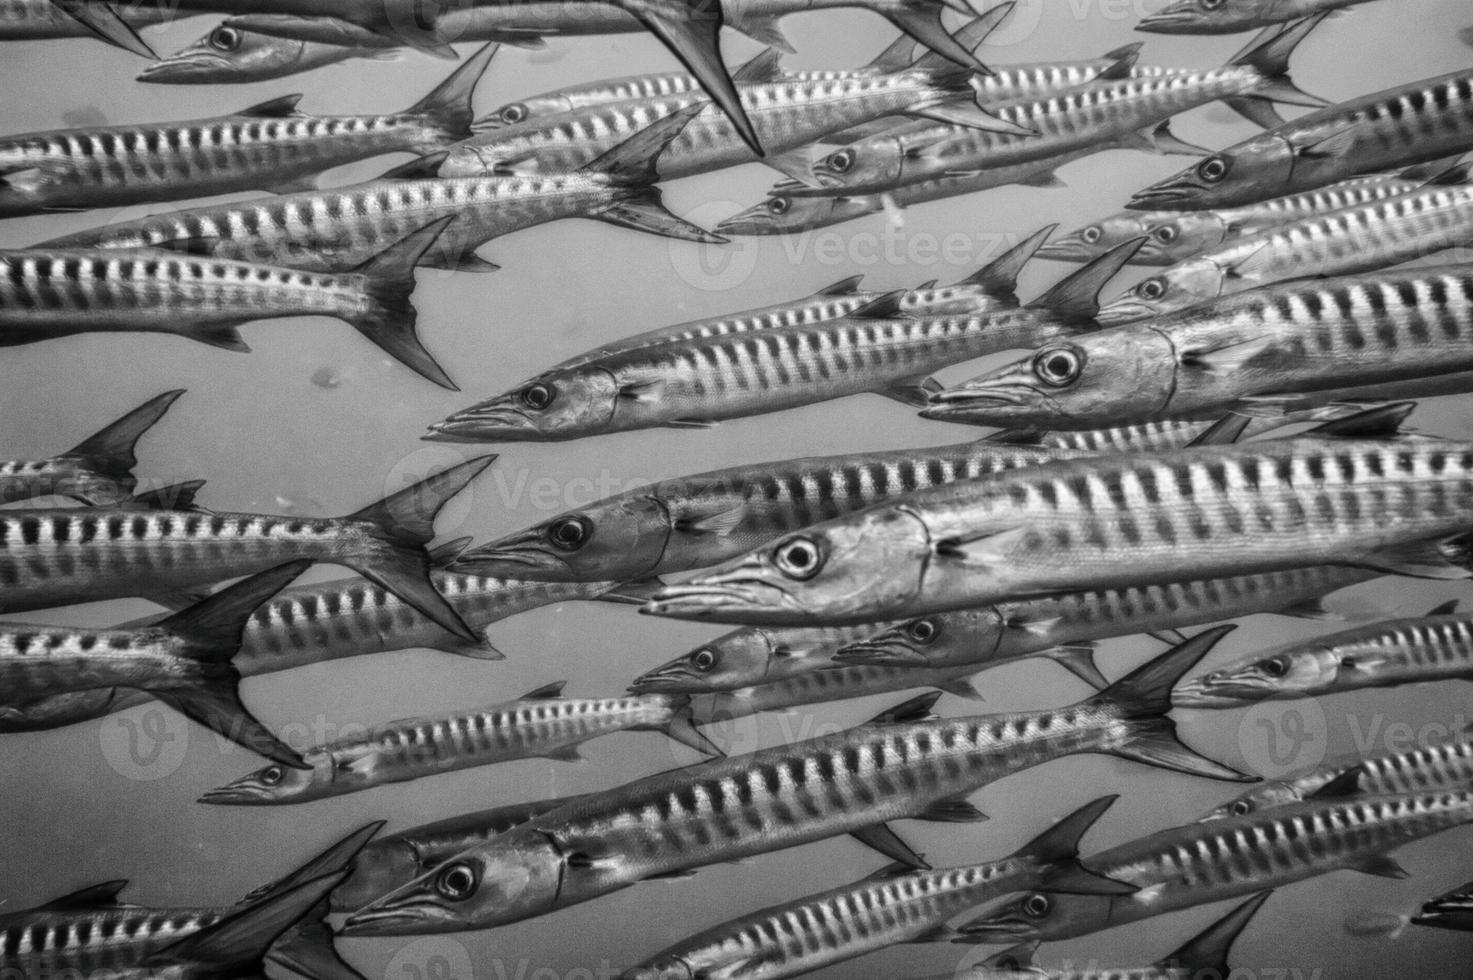 Inside a school of barracuda in black and white photo